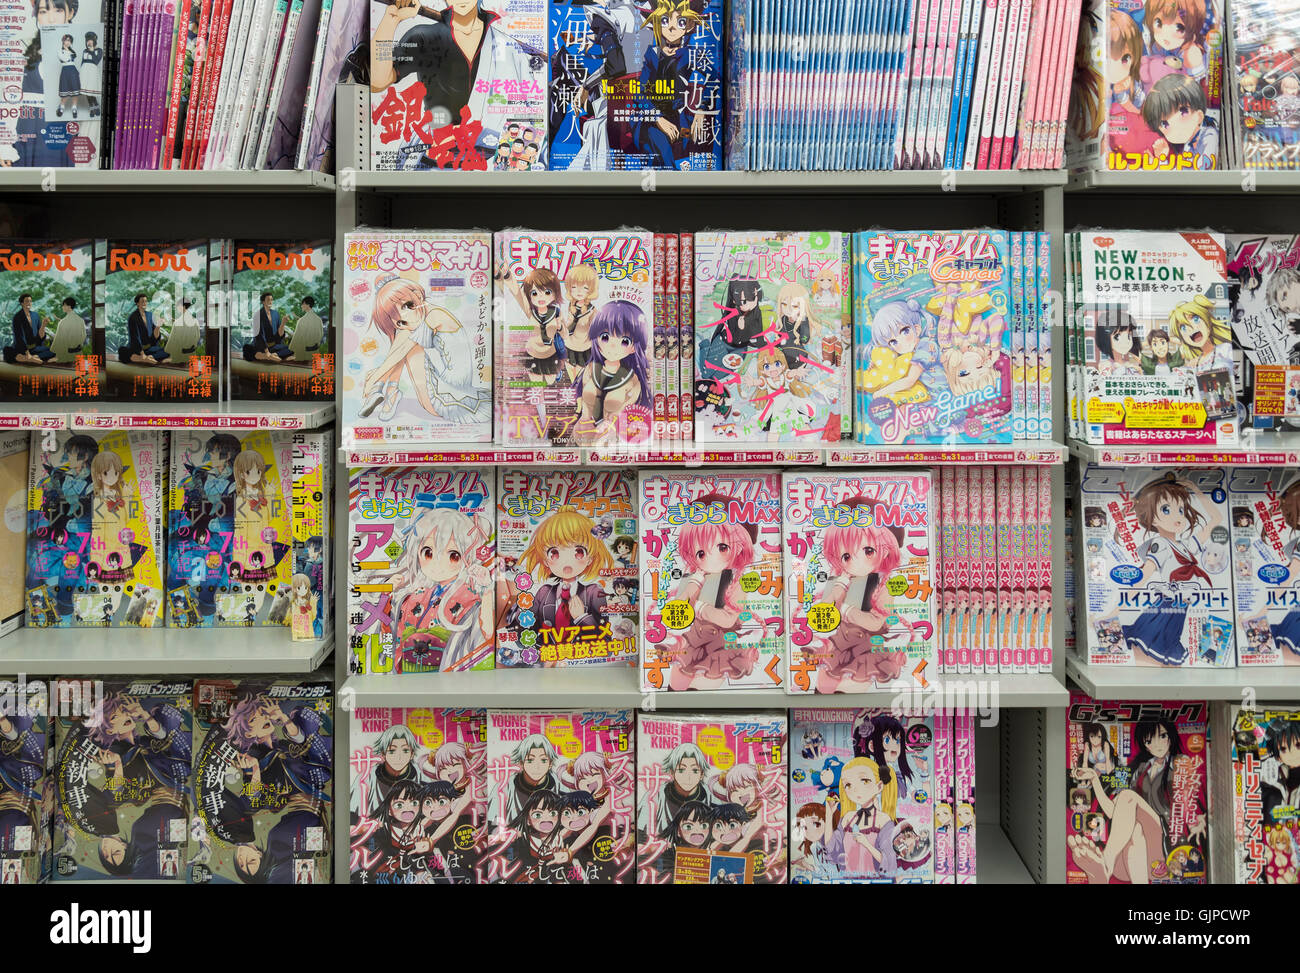 Bookshelf With Anime Comic Books And Magazine In A Shop In